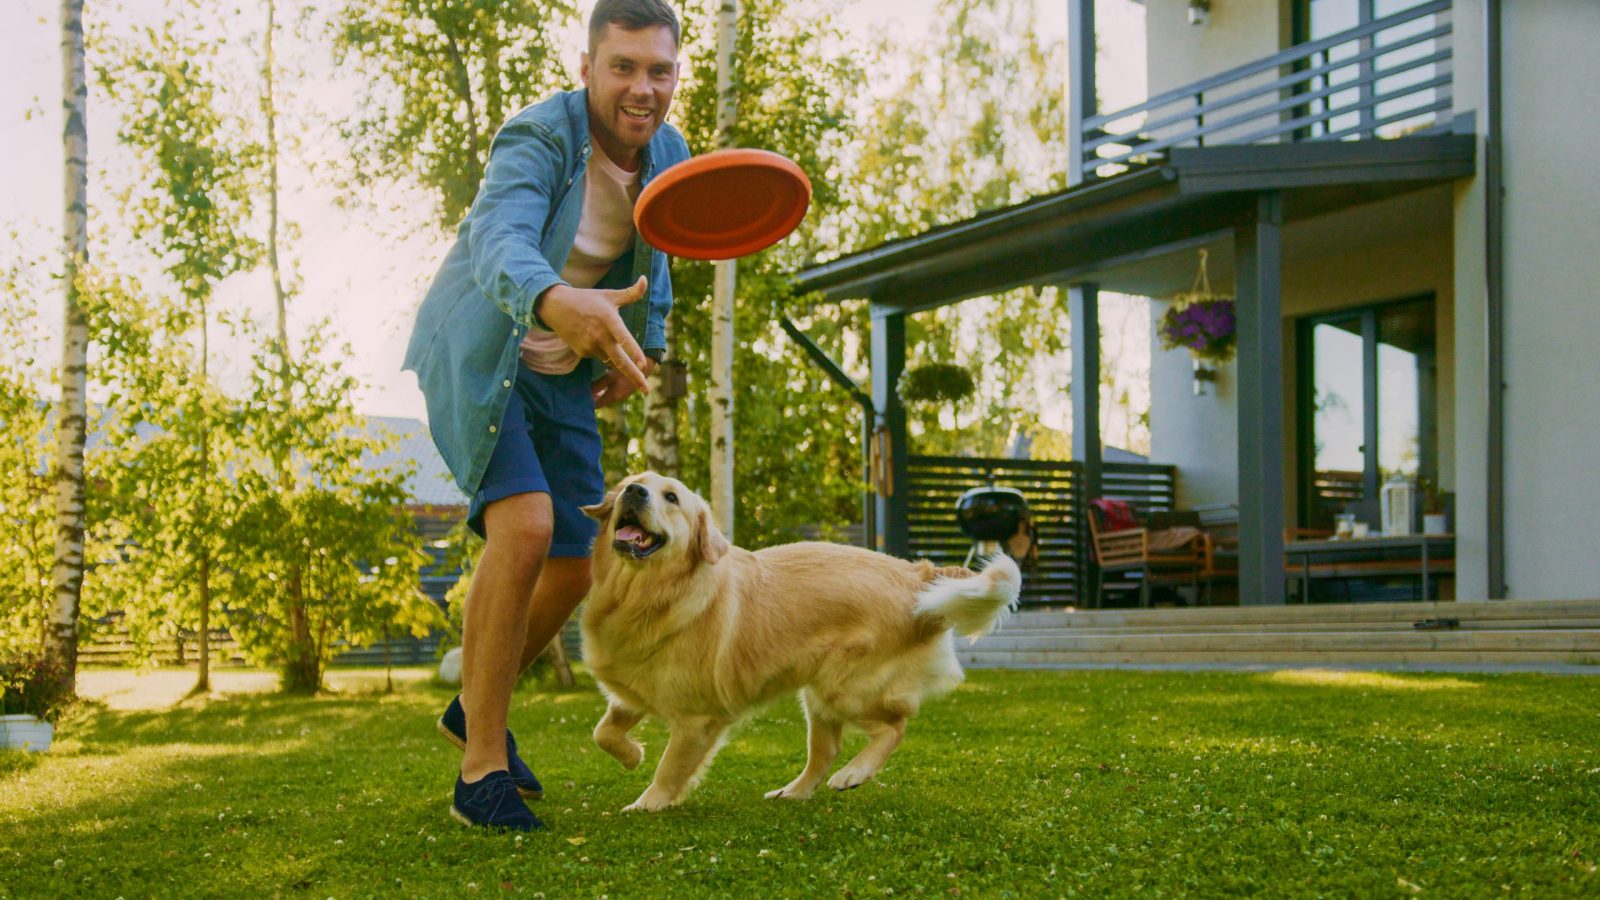 Guy throwing frisbee for his dog